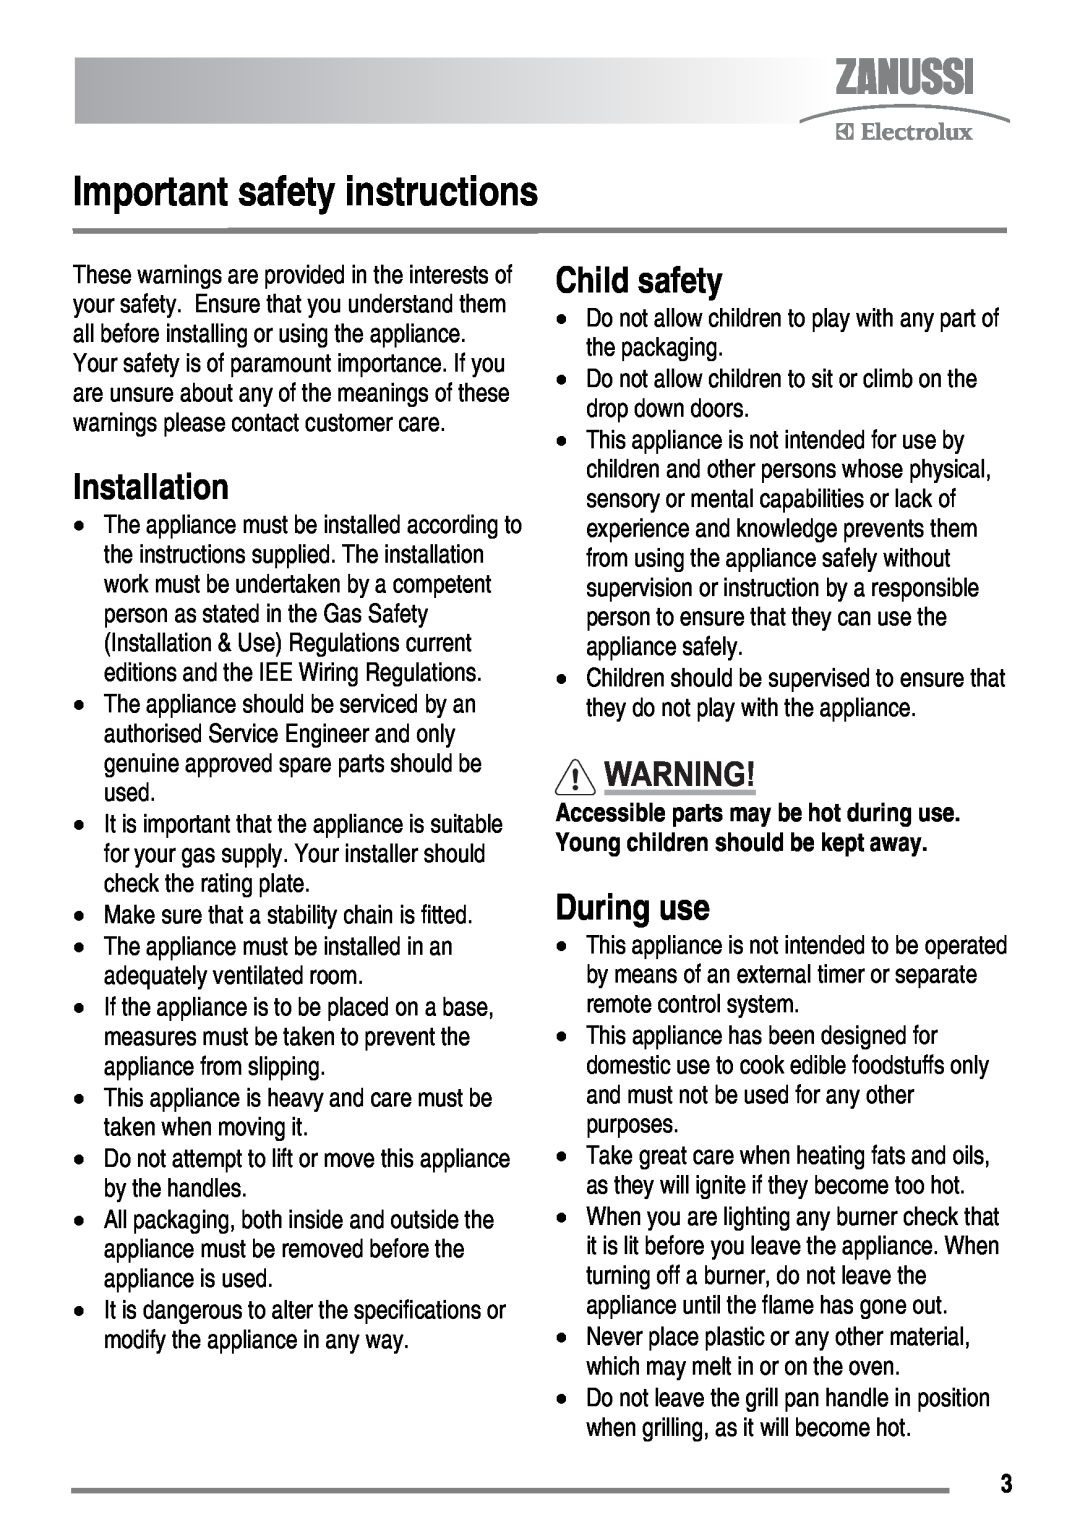 Zanussi ZKG6020 user manual Important safety instructions, Installation, Child safety, During use 